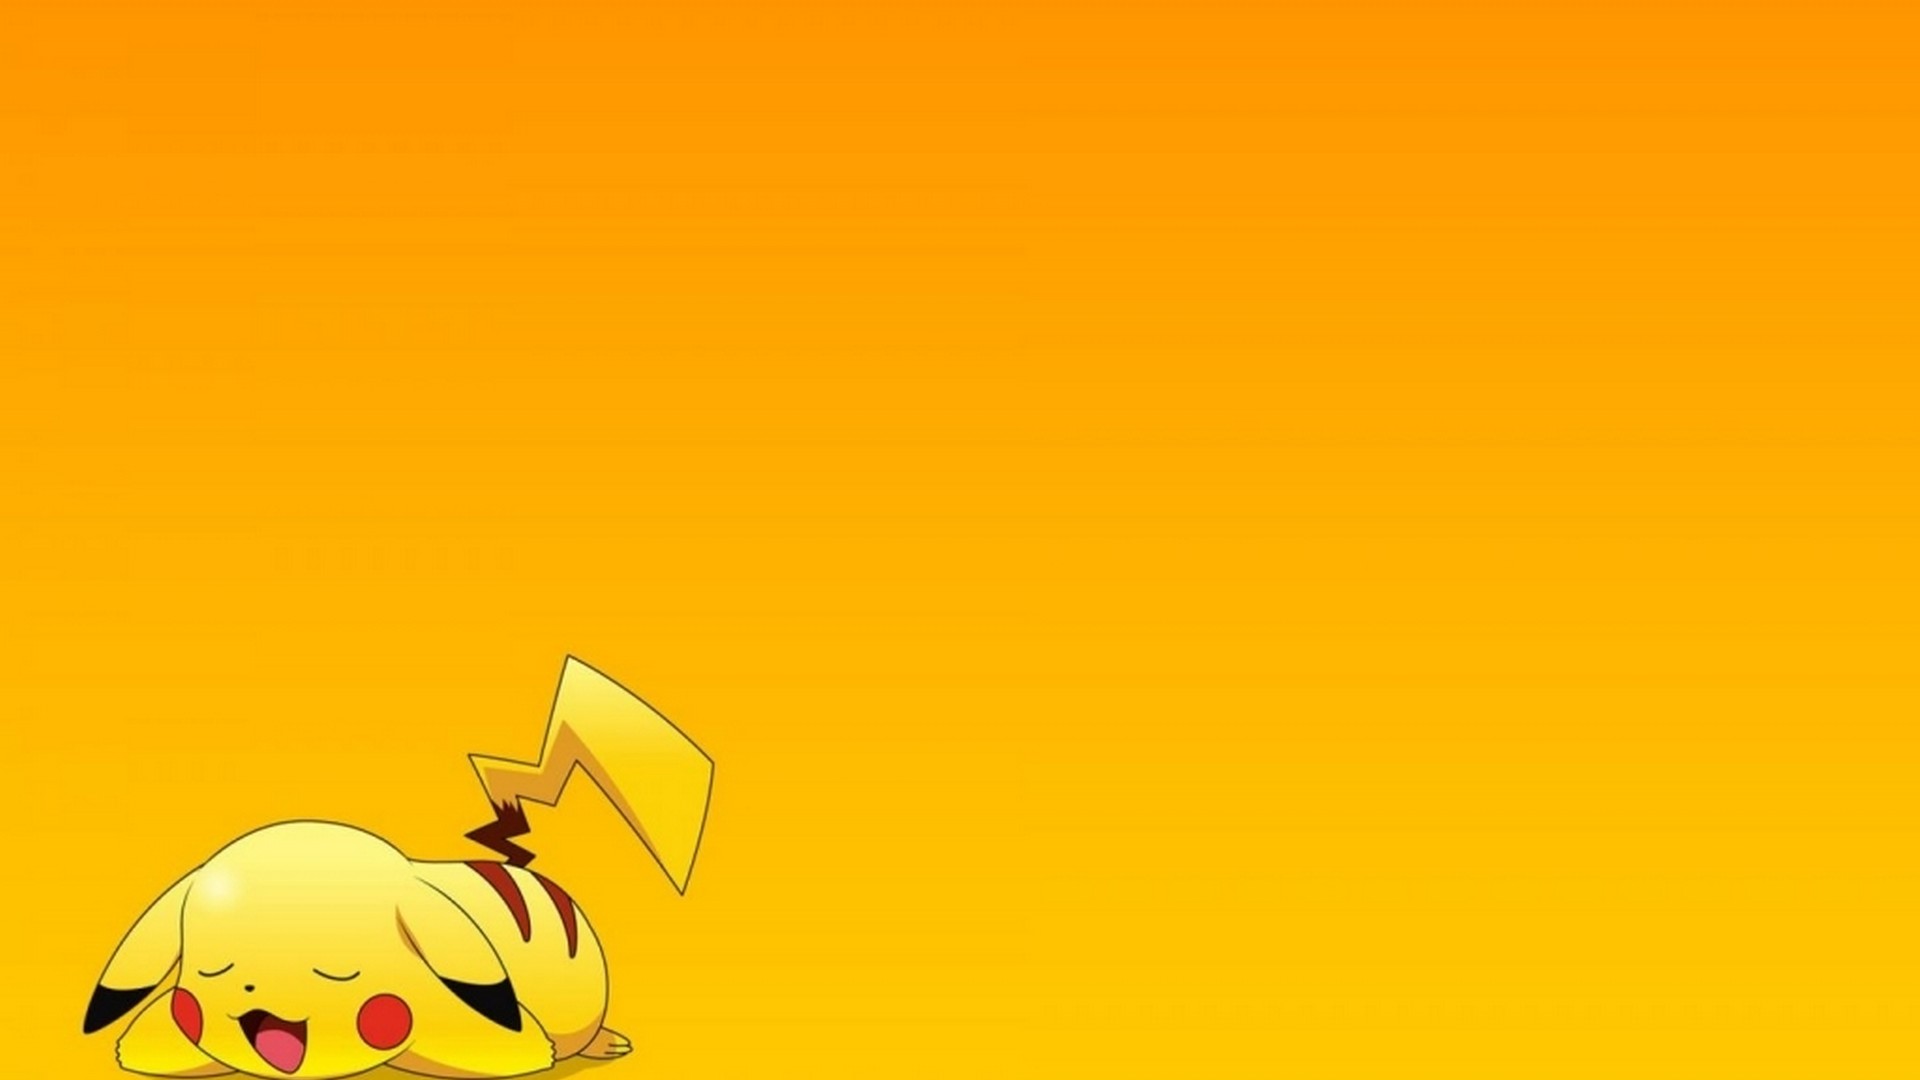 HD Yellow Cute Backgrounds with resolution 1920X1080 pixel. You can use this wallpaper as background for your desktop Computer Screensavers, Android or iPhone smartphones